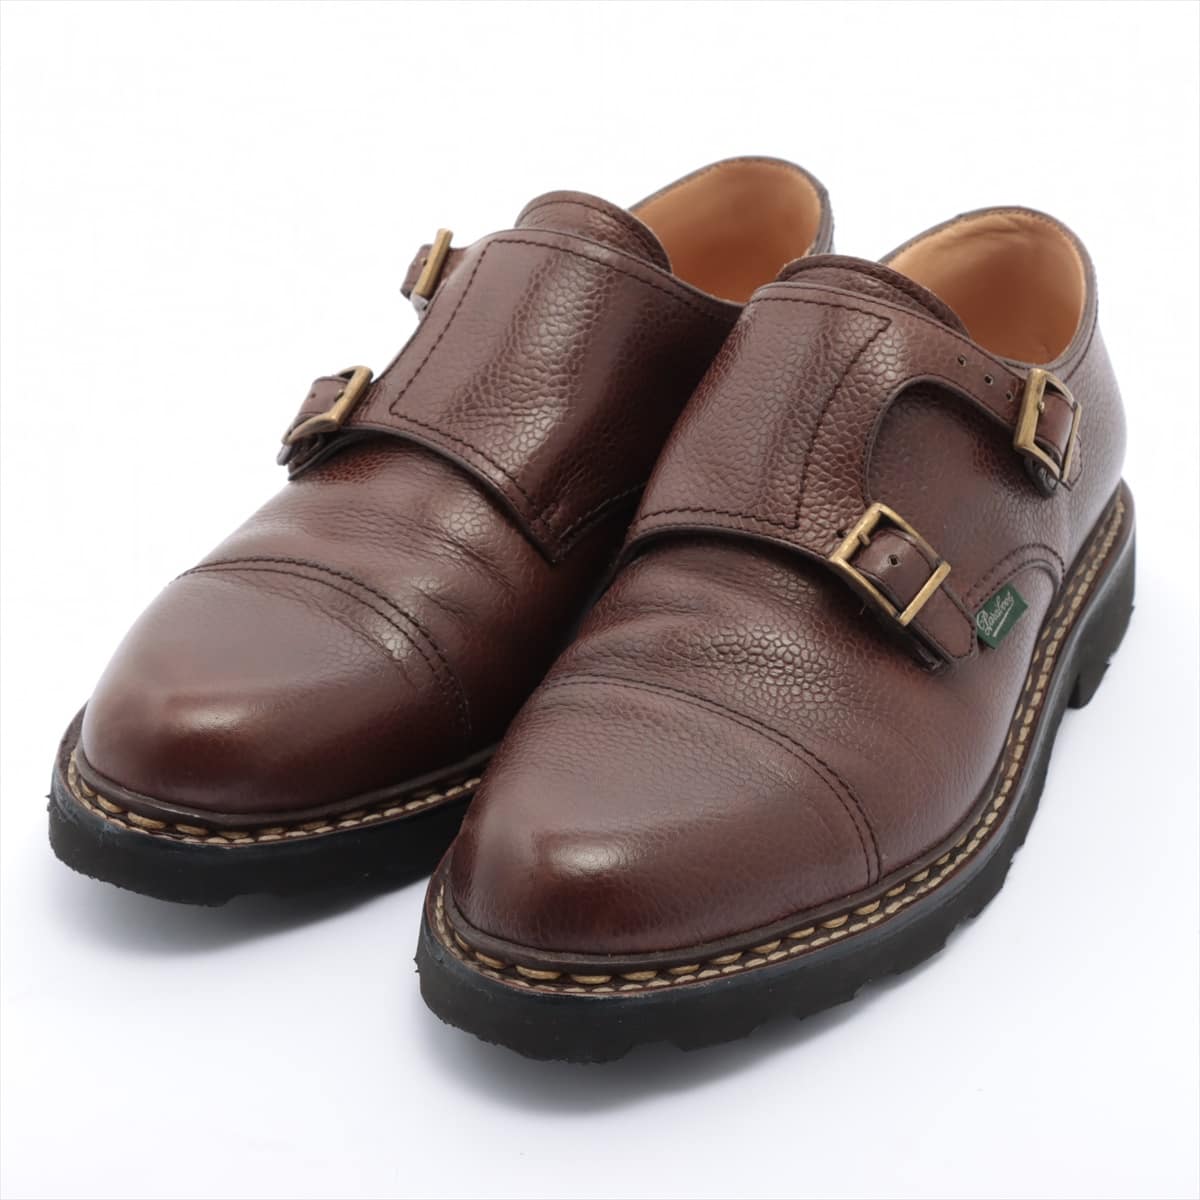 Paraboot William Leather Shoes 8 Men's Brown Double monk